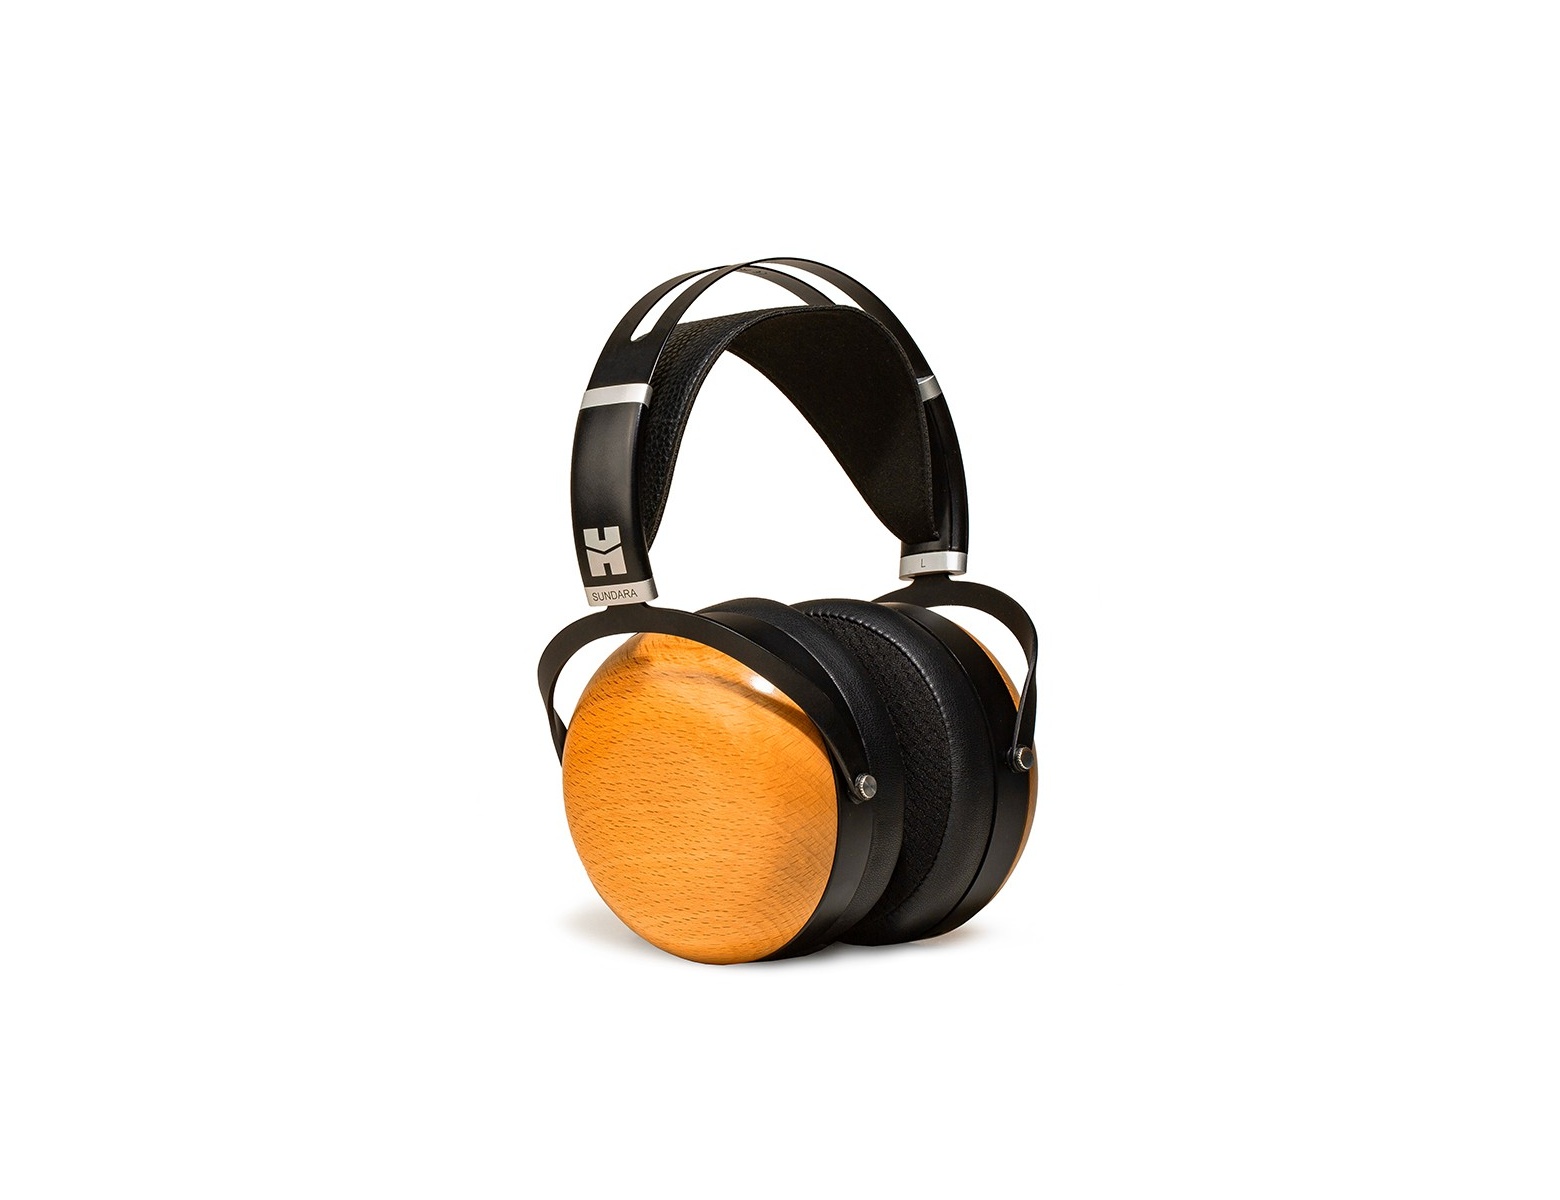 Grab these HifiMan Sundara headphones for £269 from Hifi Madness'   store with a code